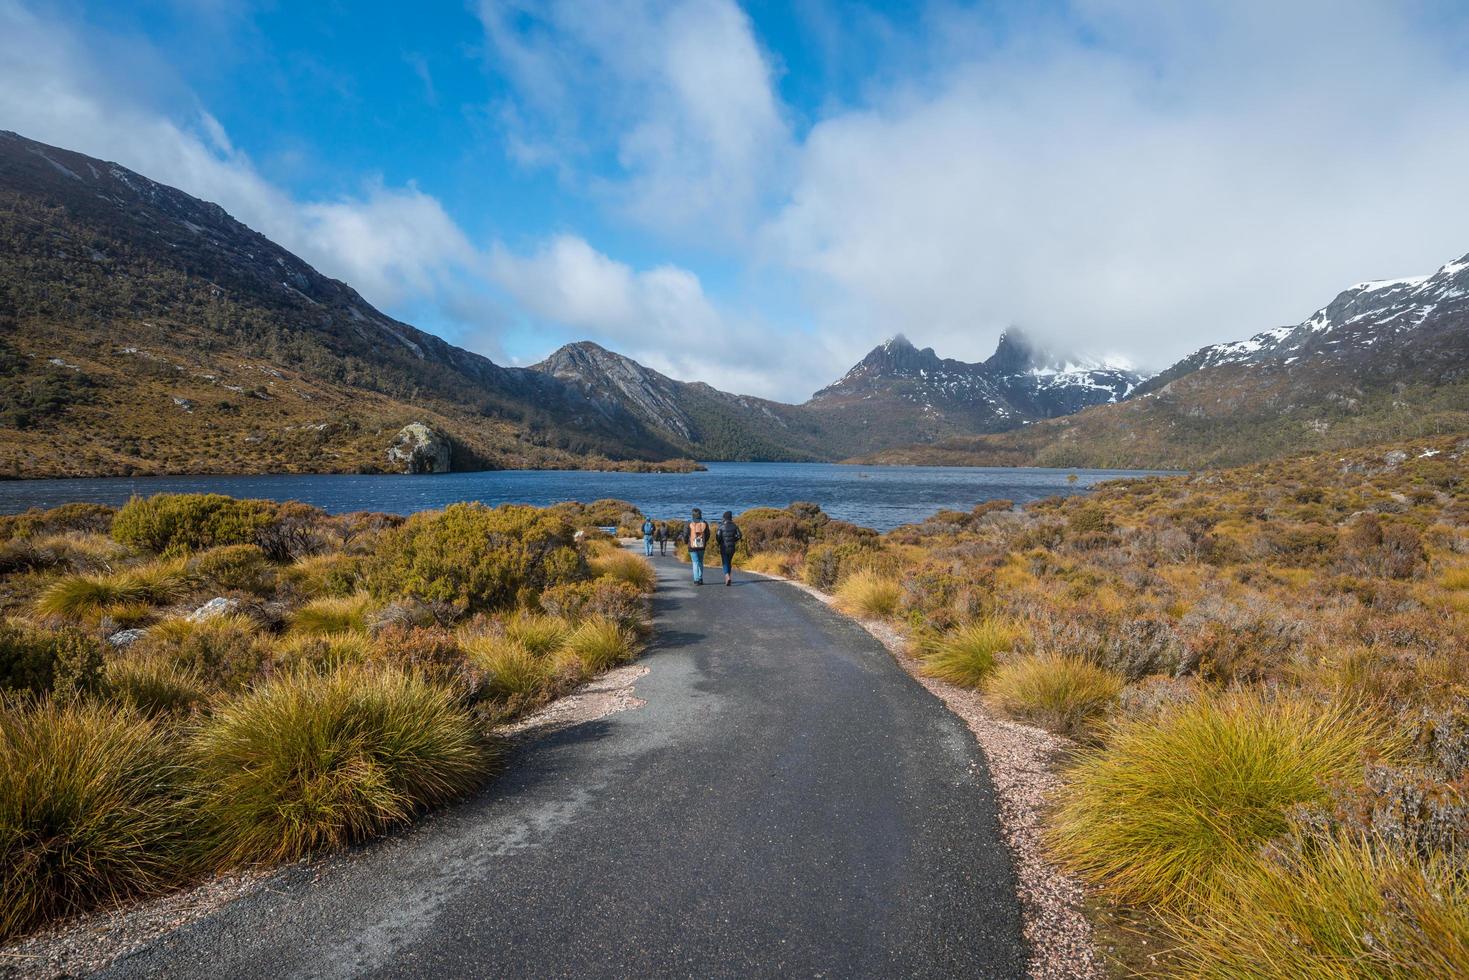 The natural trails way to Dove lake in Cradle mountain and lake St.Clair national park, Tasmania, Australia. photo